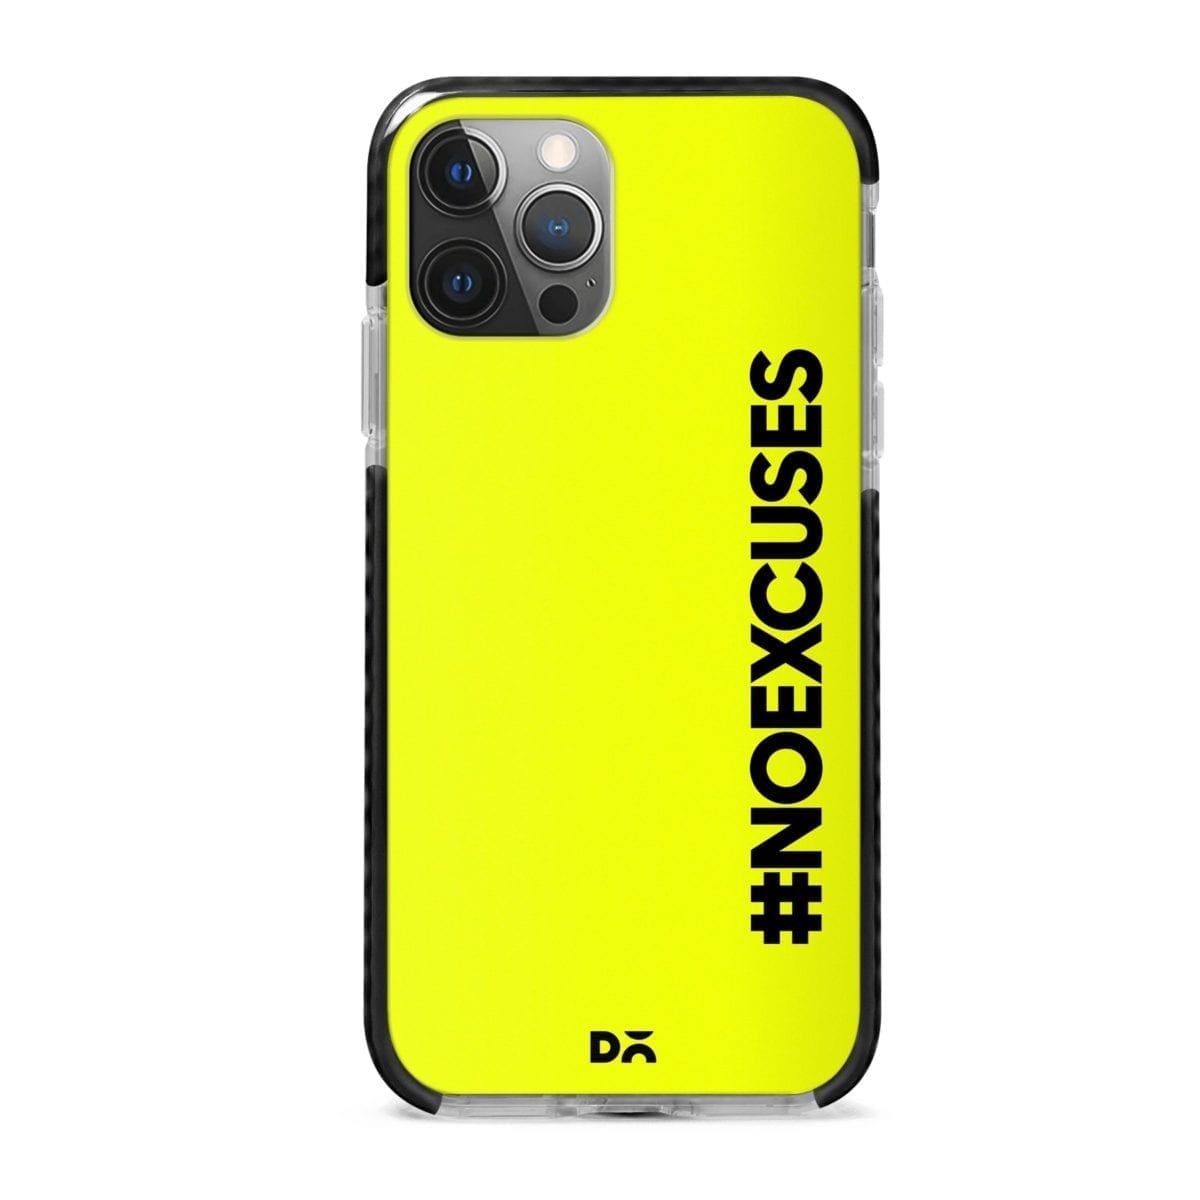 NoExcuses Stride Case Cover for Apple iPhone 12 Pro and Apple iPhone 12 Pro Max with great design and shock proof | Klippik | Online Shopping | Kuwait UAE Saudi